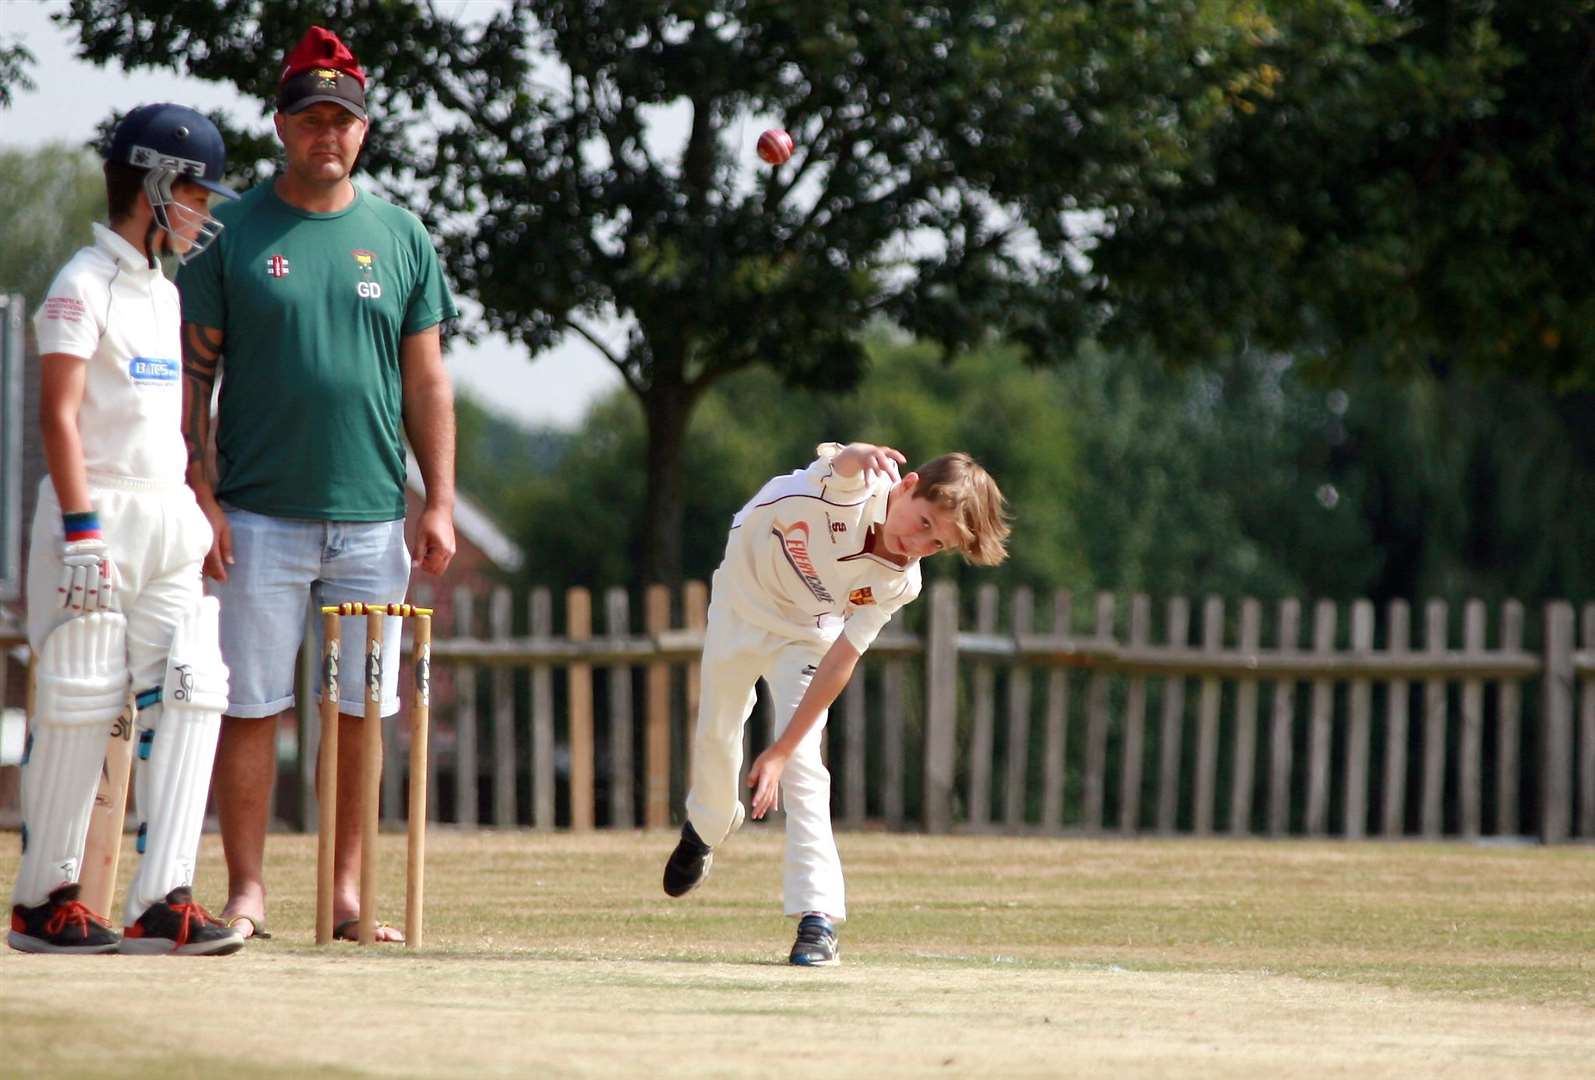 Lordswood under-11s up against High Halstow in the Medway Youth Cricket League Picture: Phil Lee